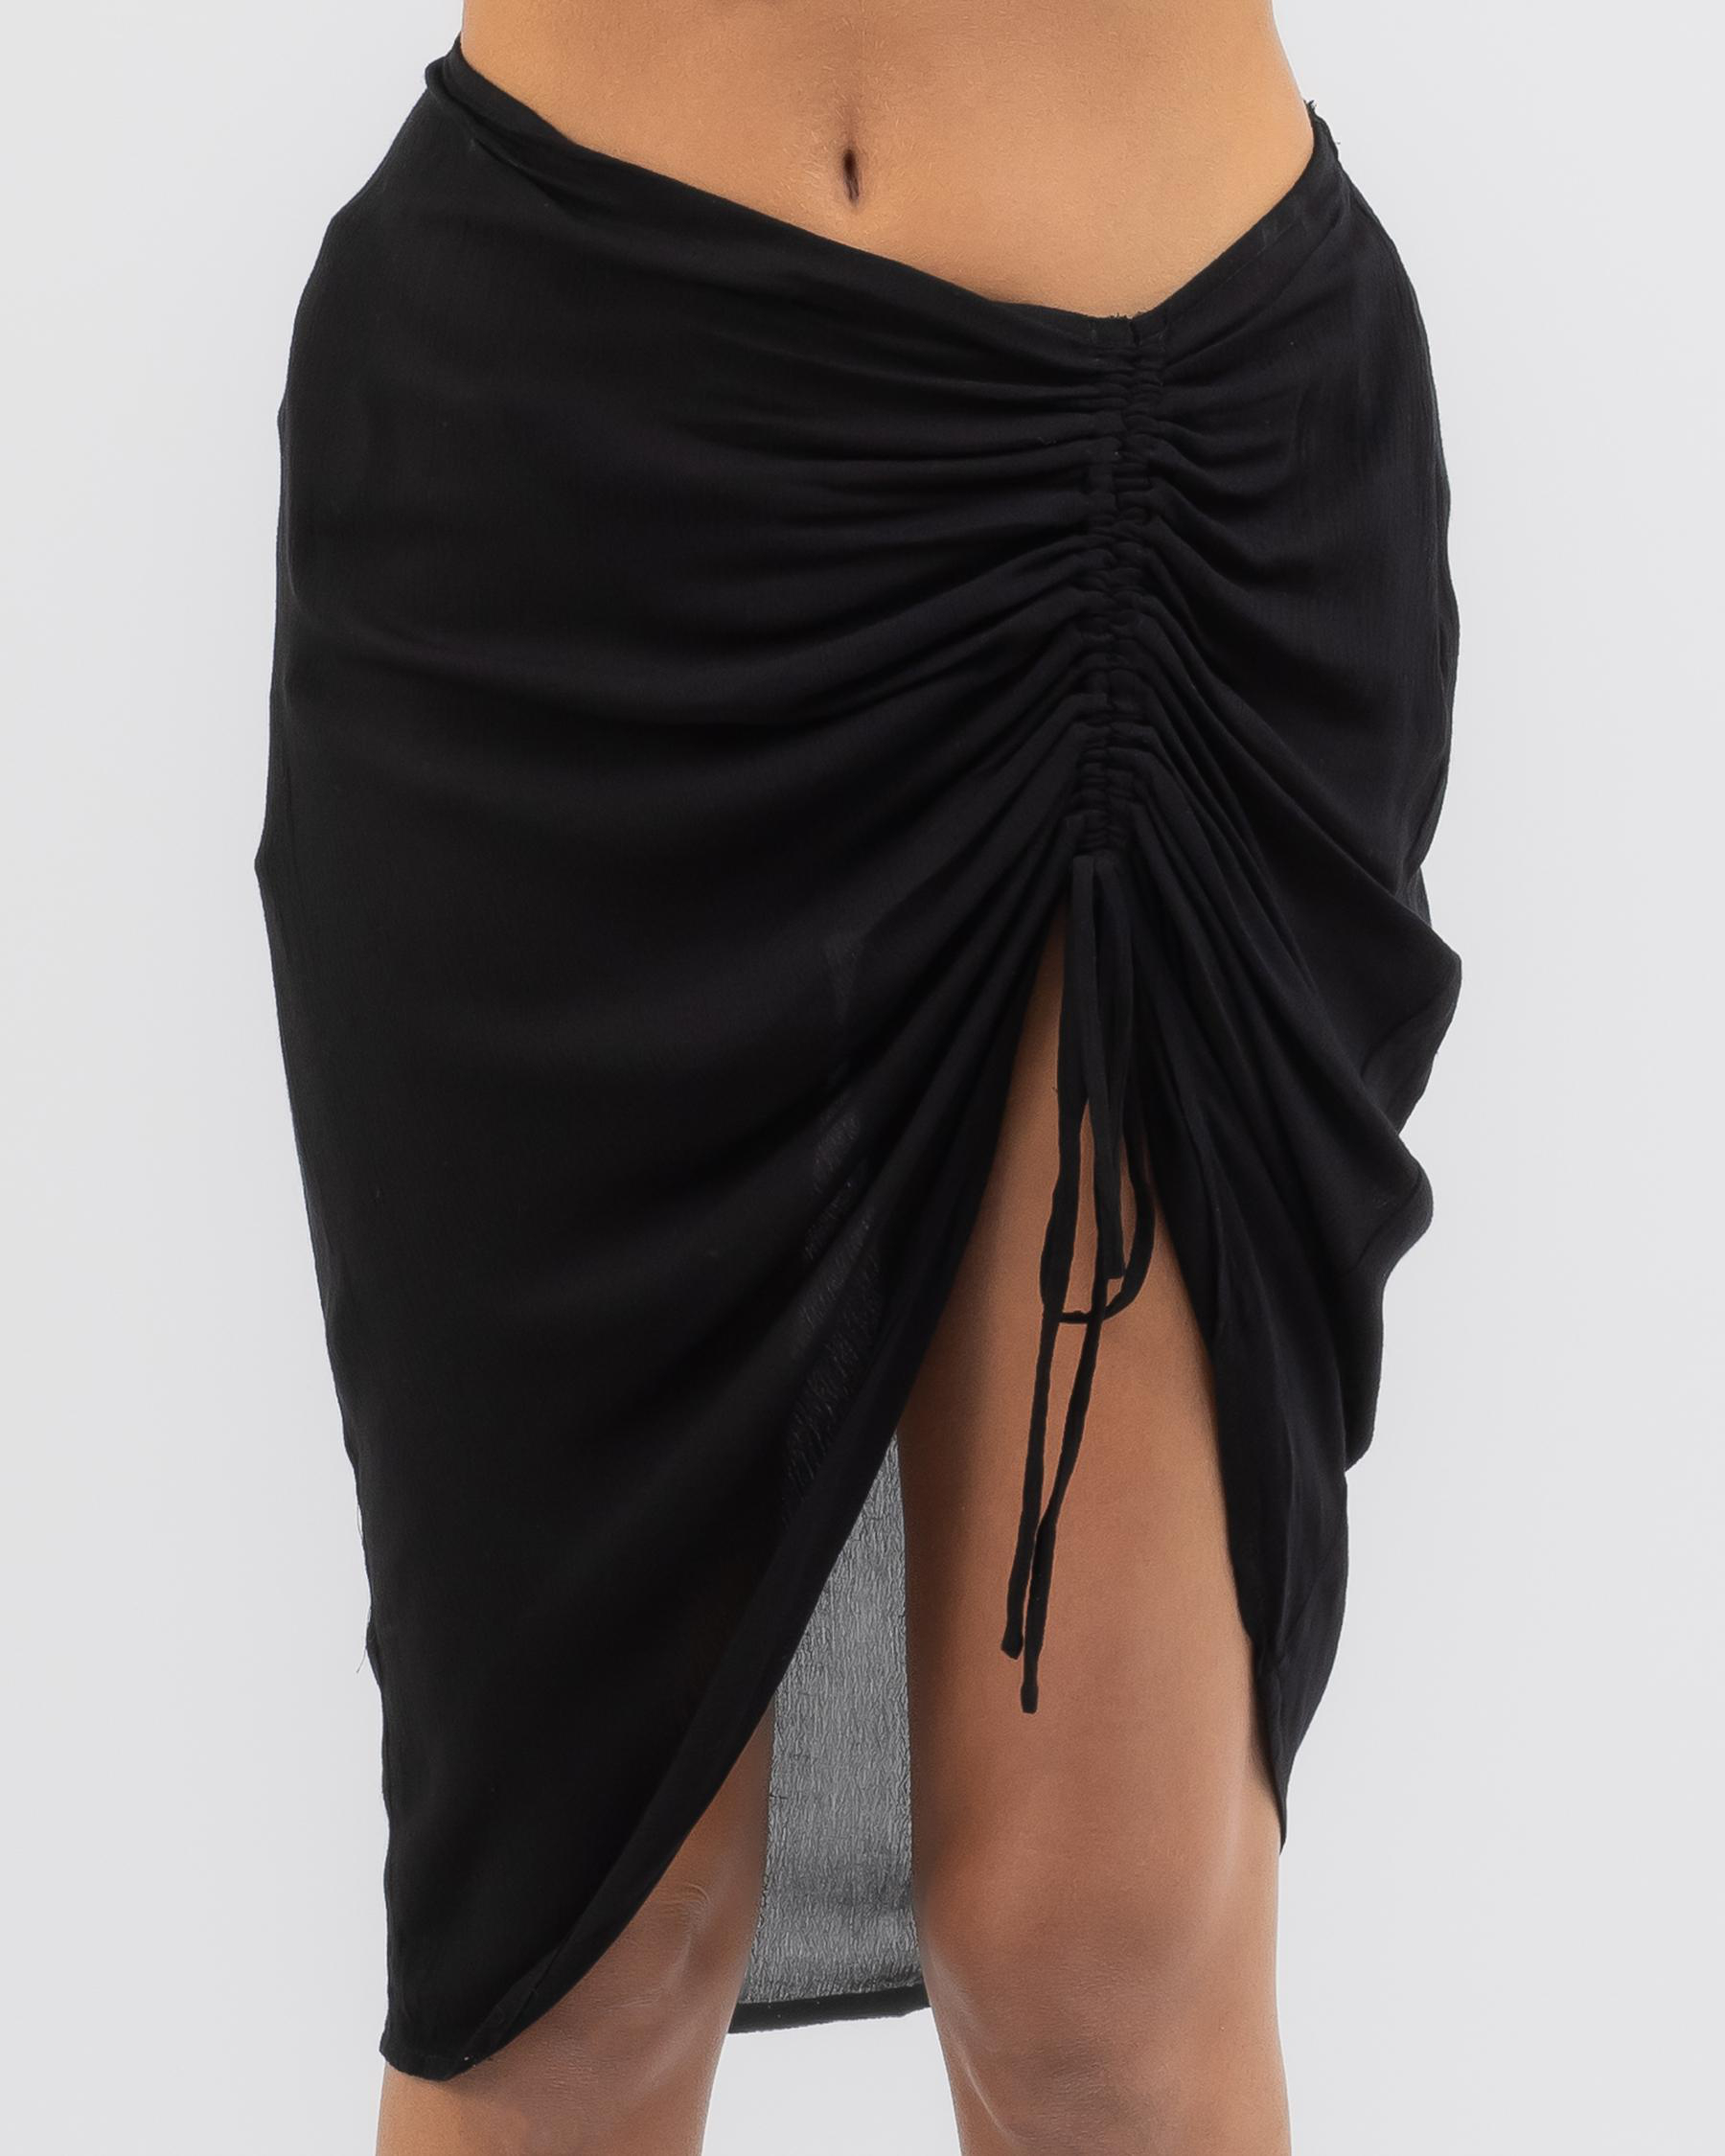 Kaiami Fyre Ruch Sarong In Black - Fast Shipping & Easy Returns - City ...